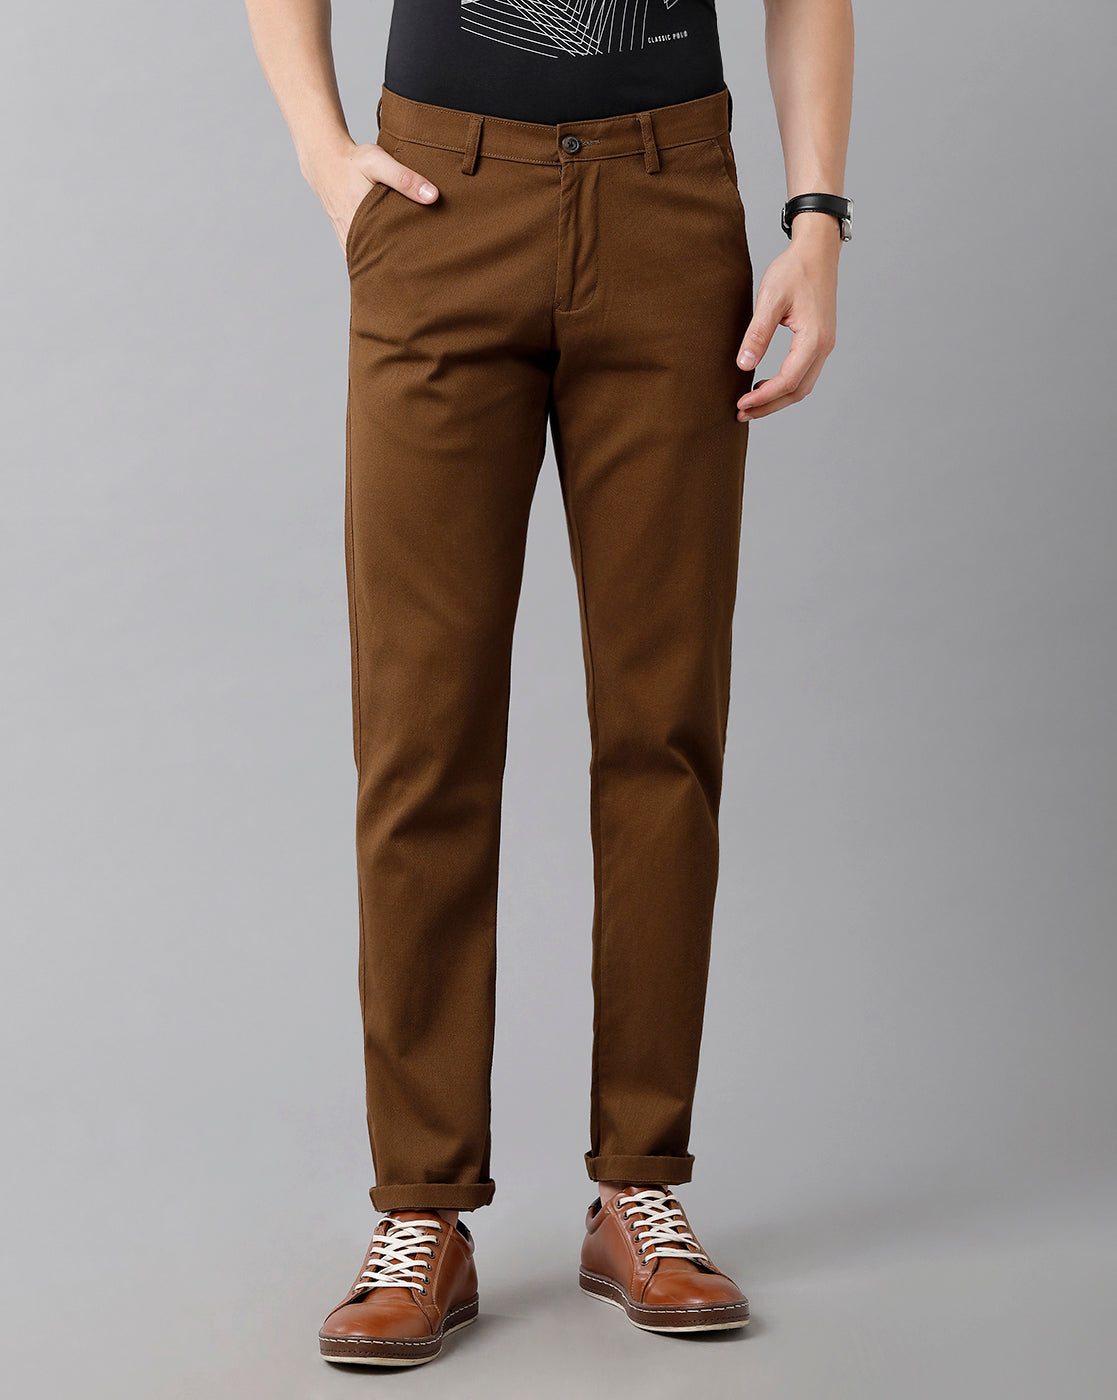 Classic Polo Men's Cotton Solid Slim Fit Brown Color Trousers | Tn2-08 B